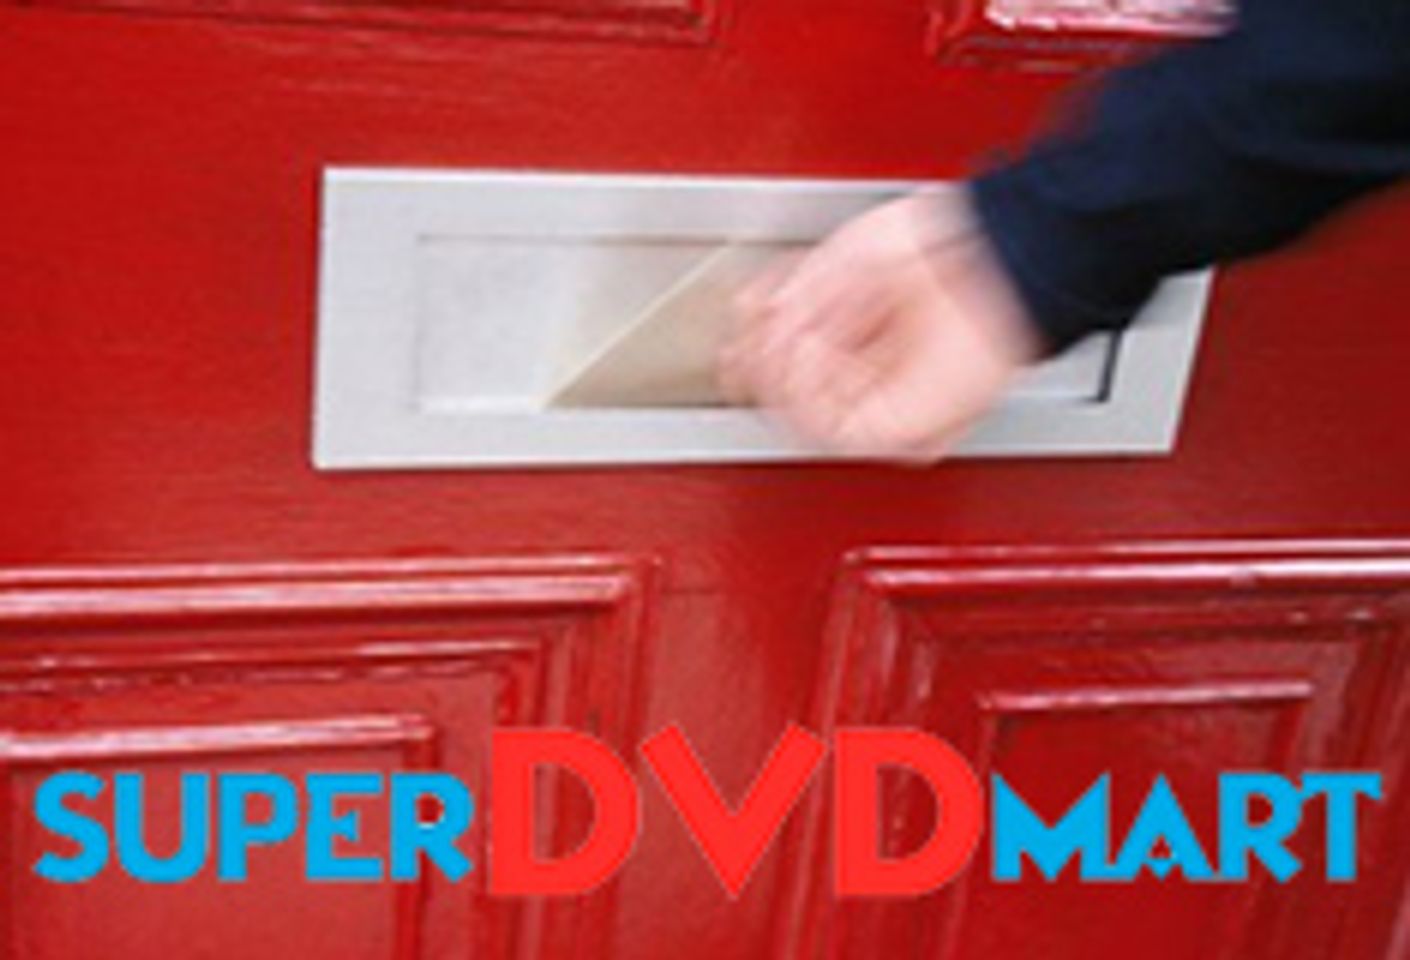 SuperDVDMart Offers Retailers Same-Day Shipping